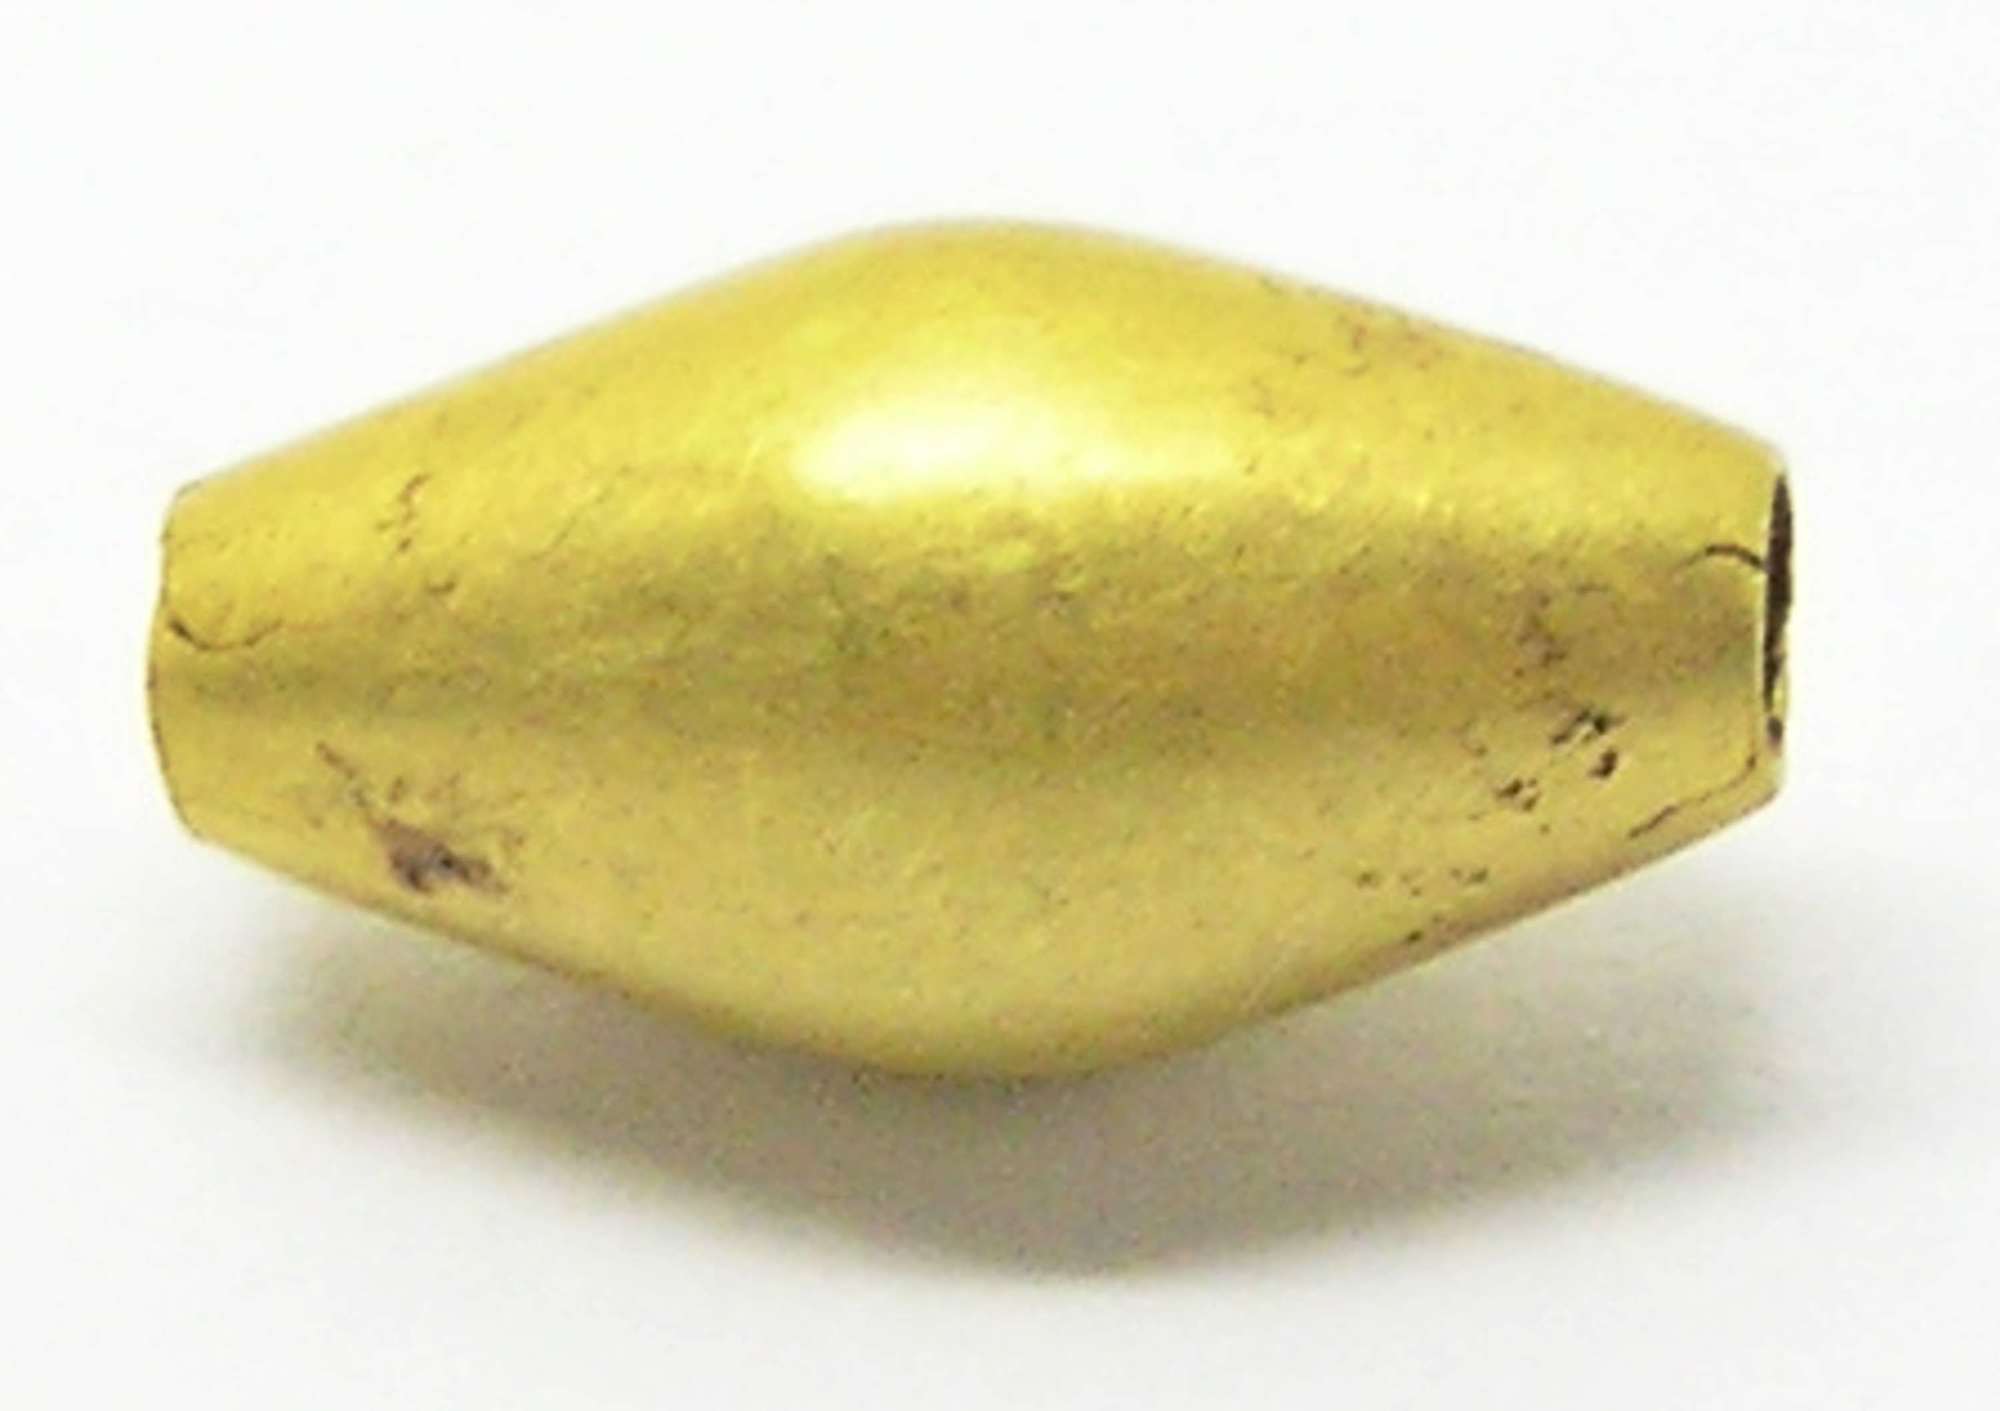 Anglo Saxon gold biconical spacer bead